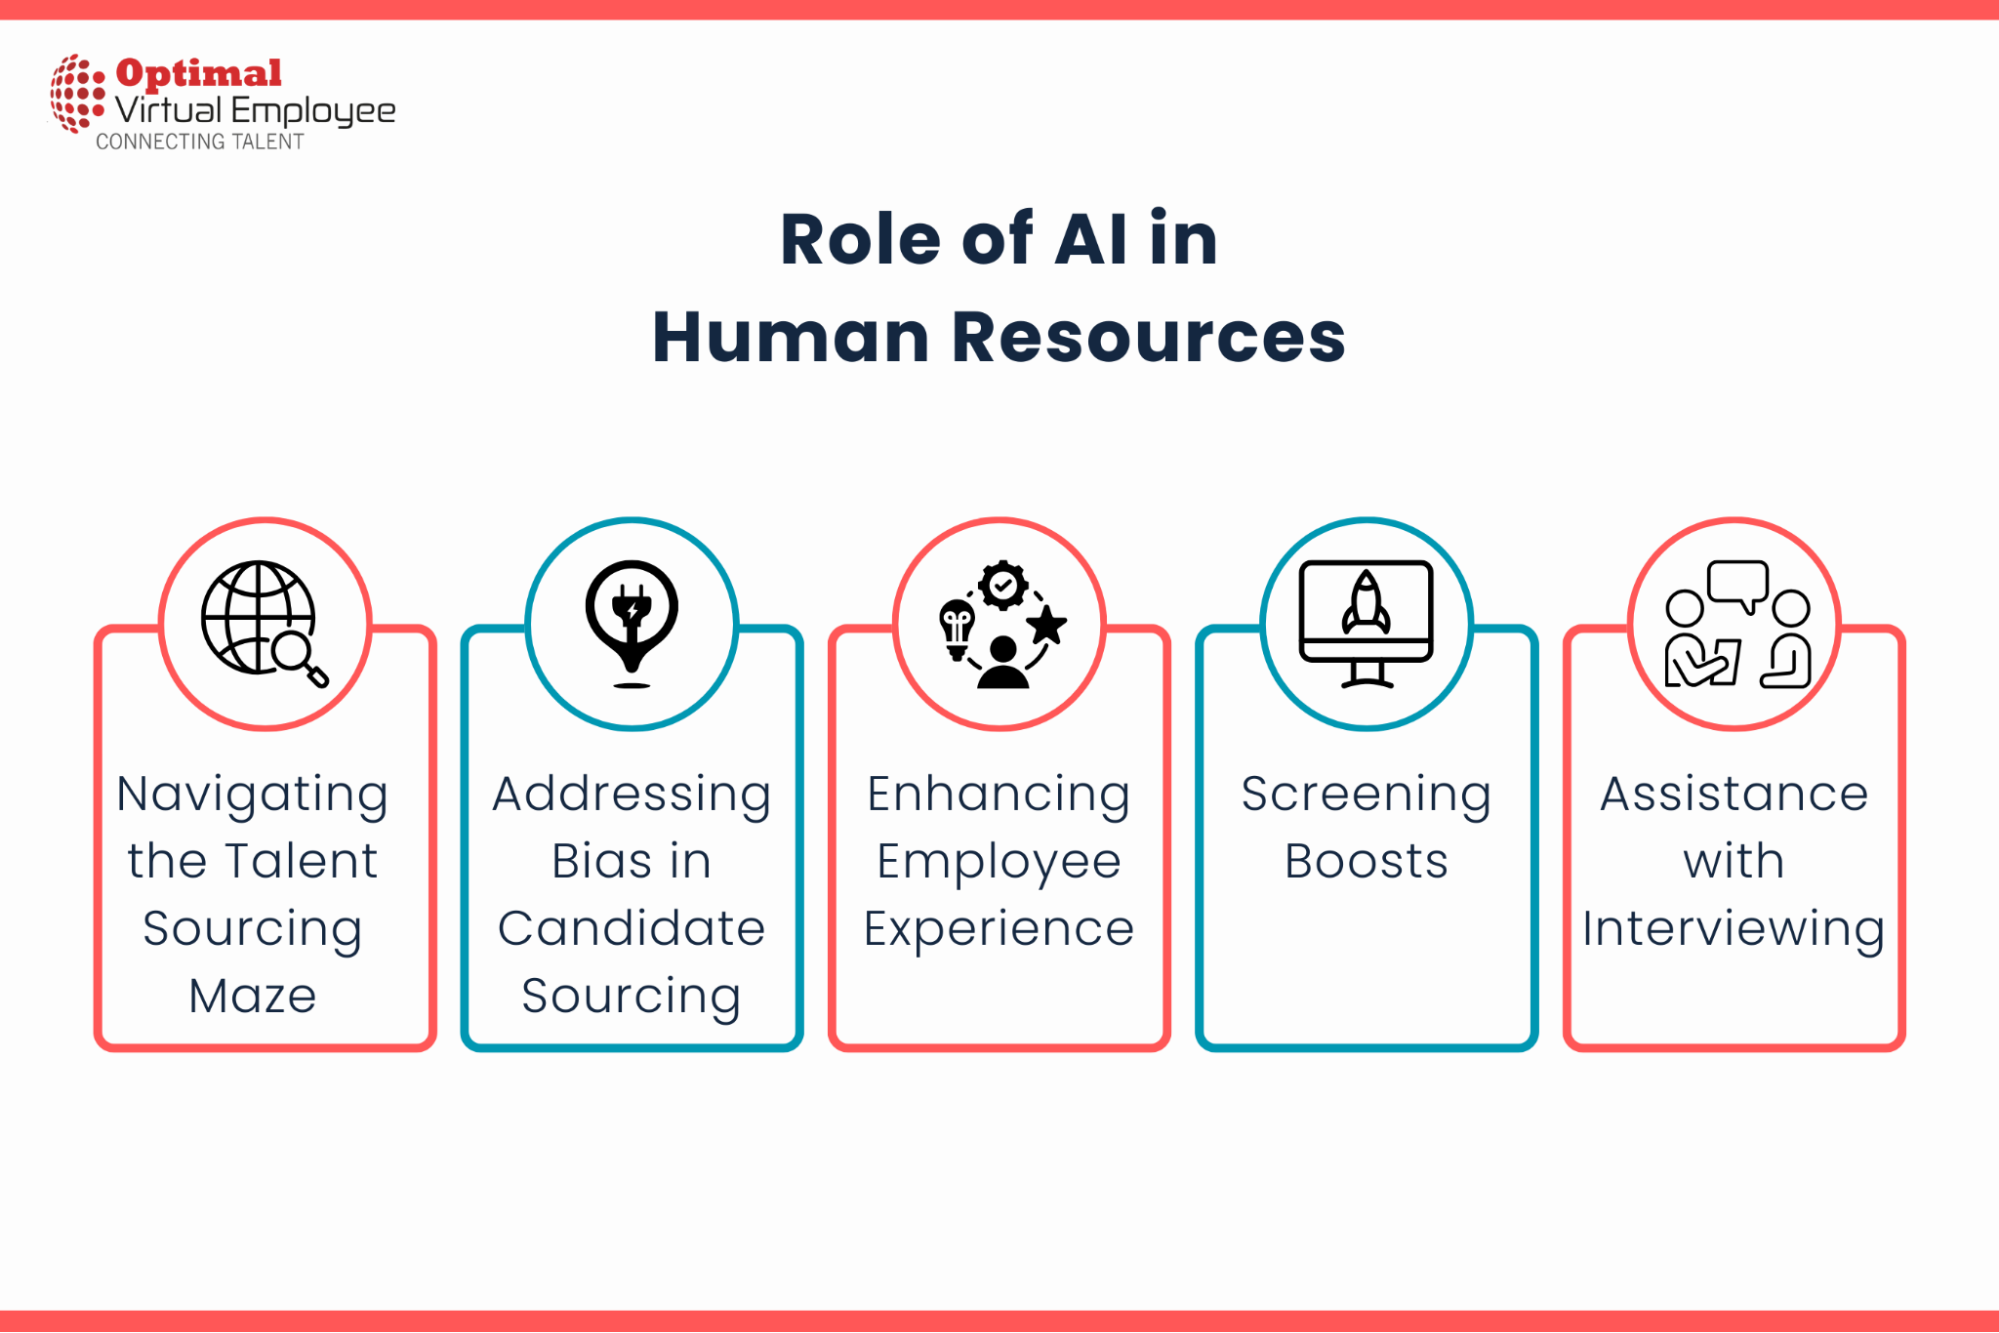 How Is AI Changing Human Resources